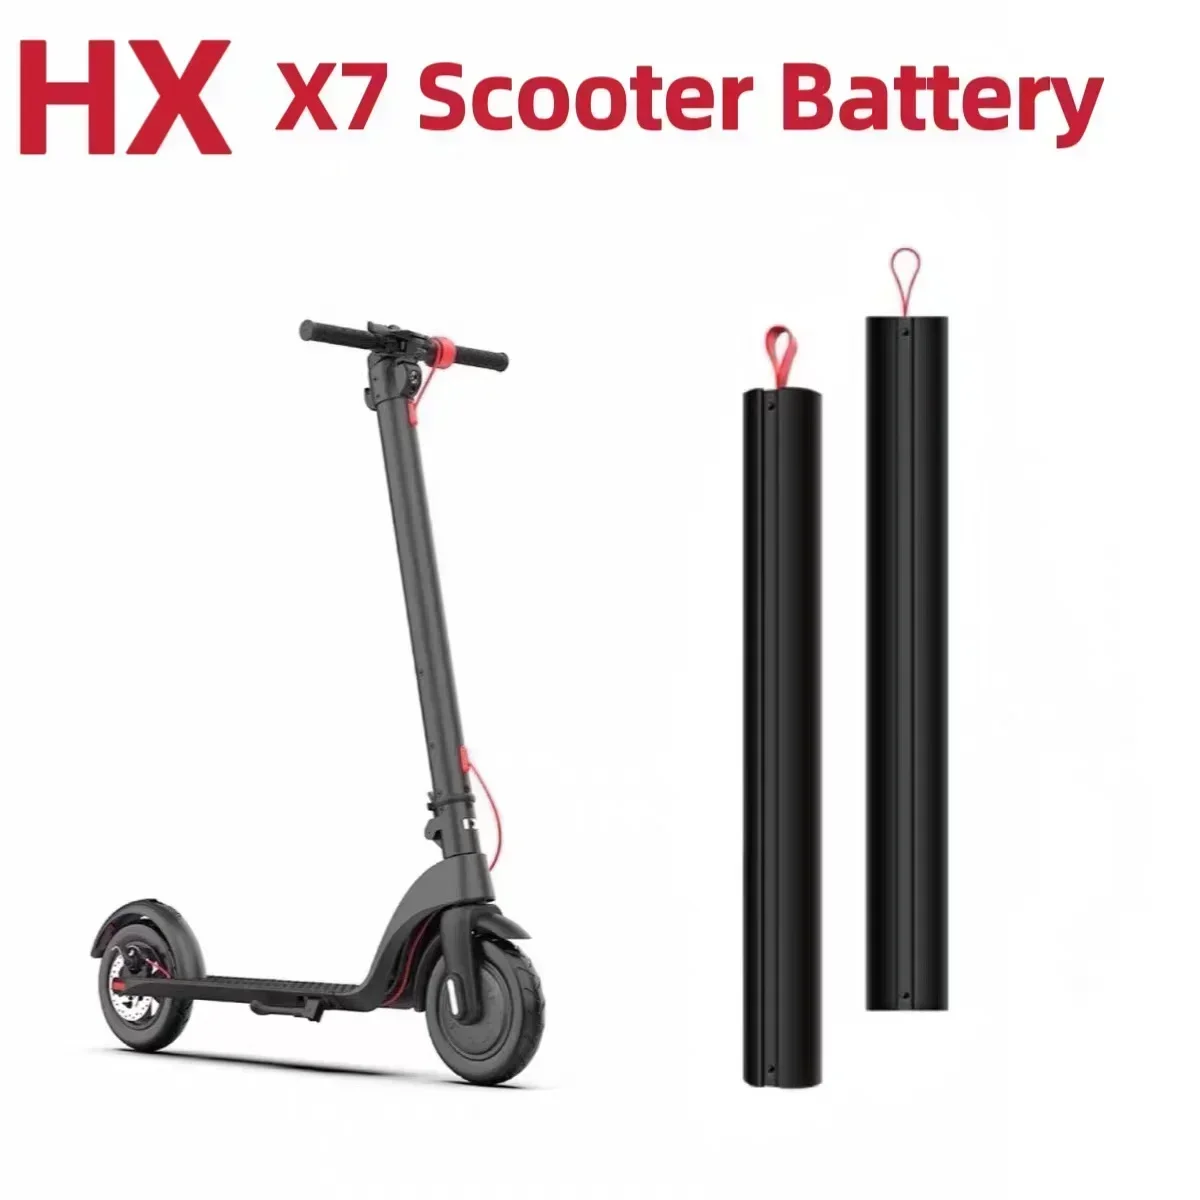 

Original Battery for HX X7 Electric Scooter X7 5Ah and X7 Panasonic 6.4Ah Battery